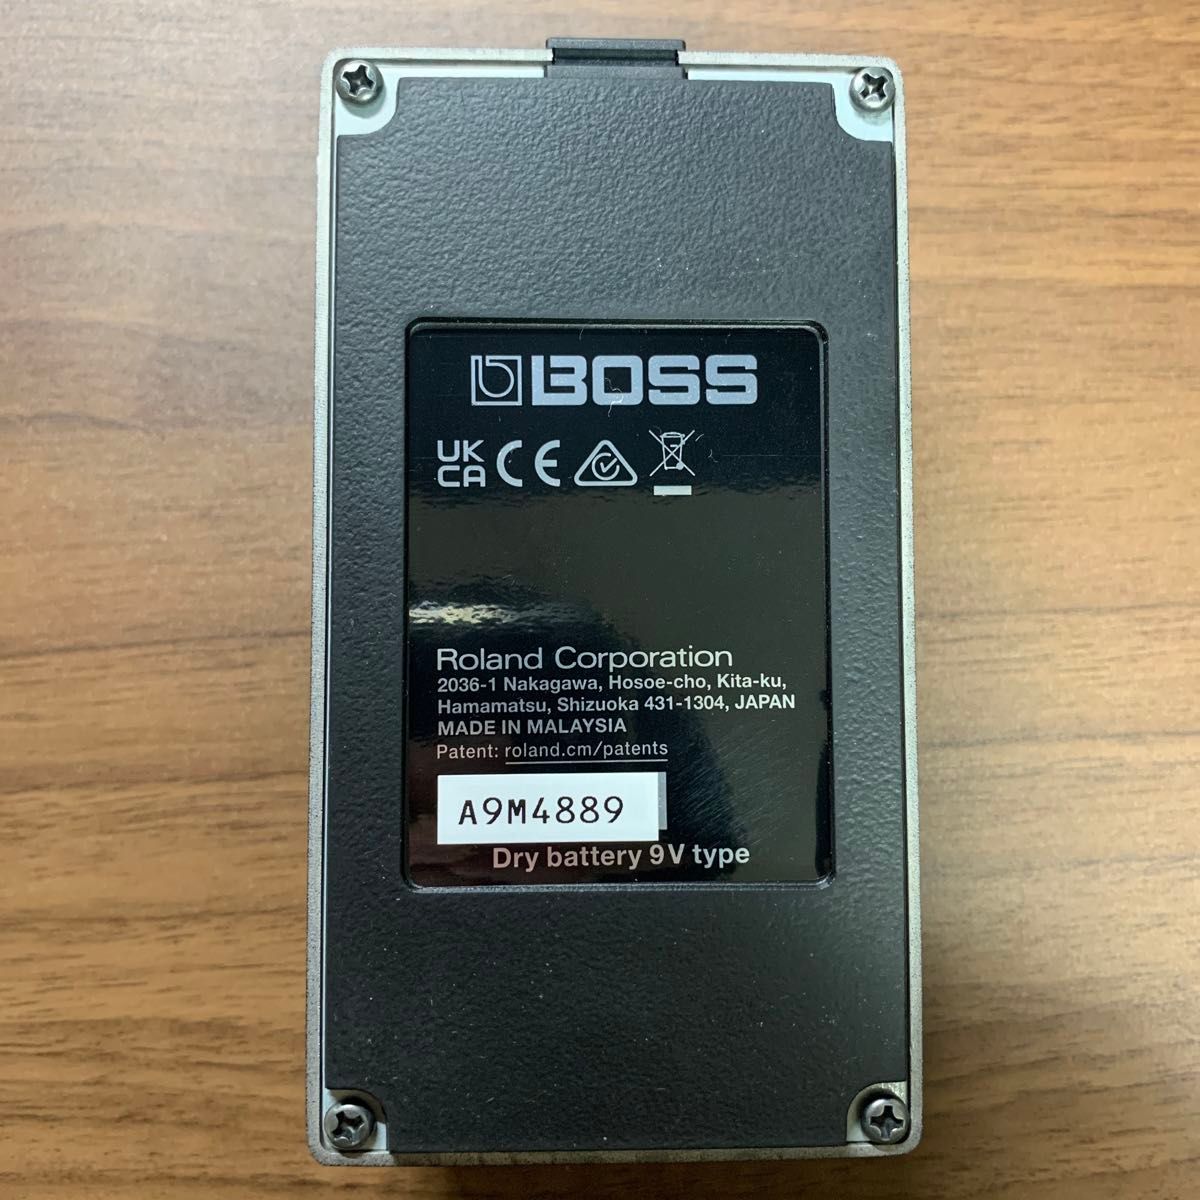 BOSS SUPER Over Drive SD-1 40周年記念モデル